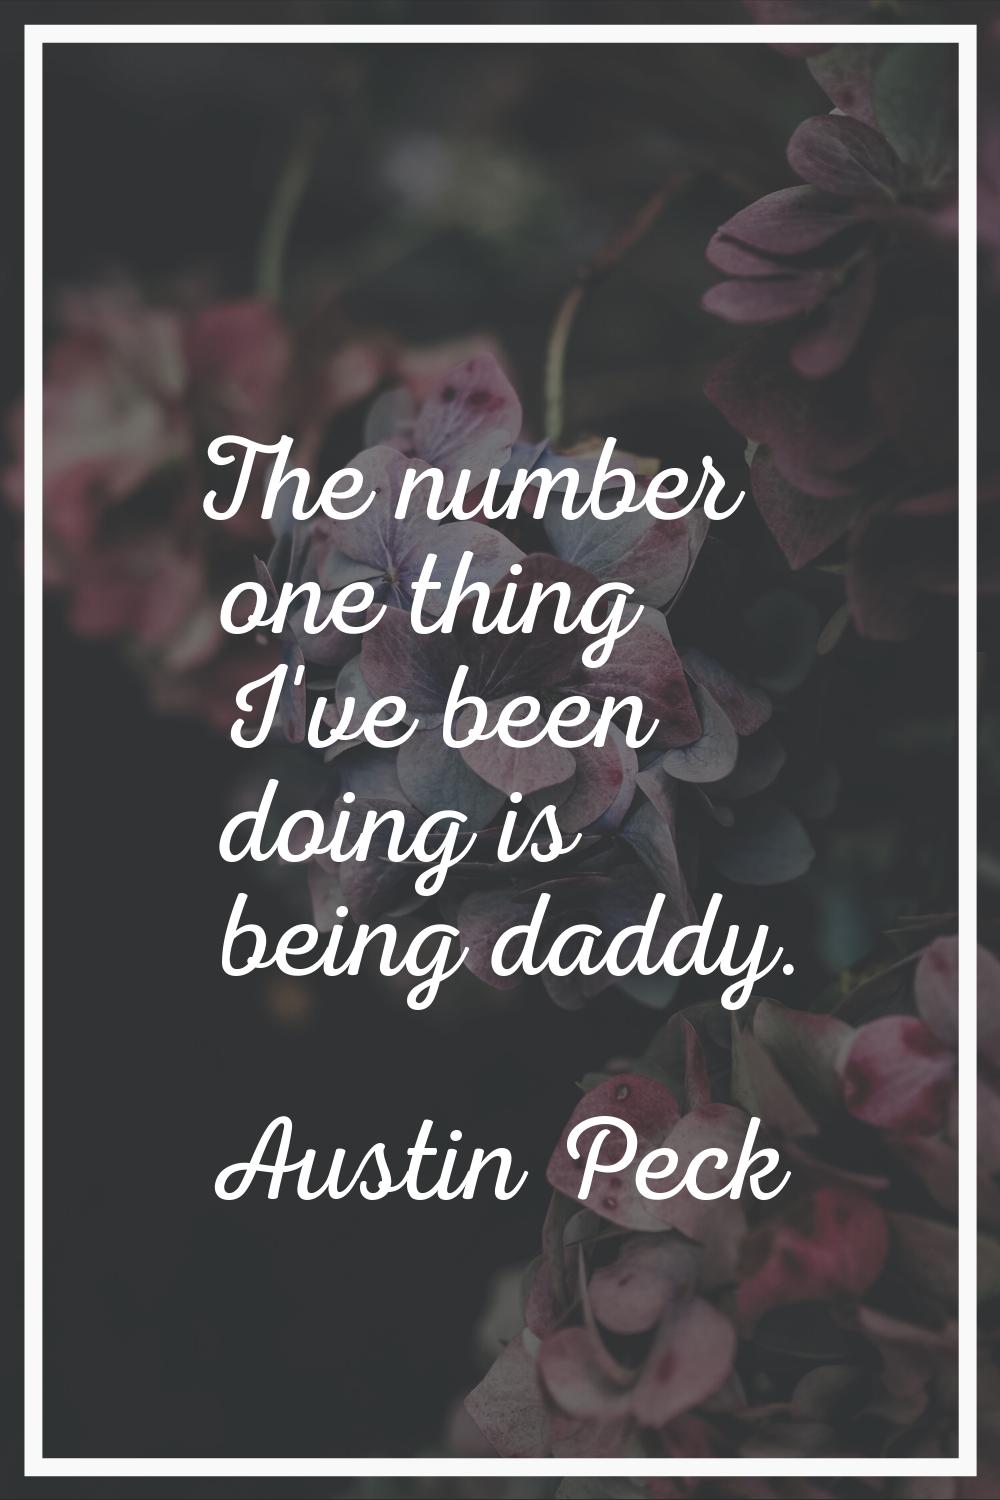 The number one thing I've been doing is being daddy.